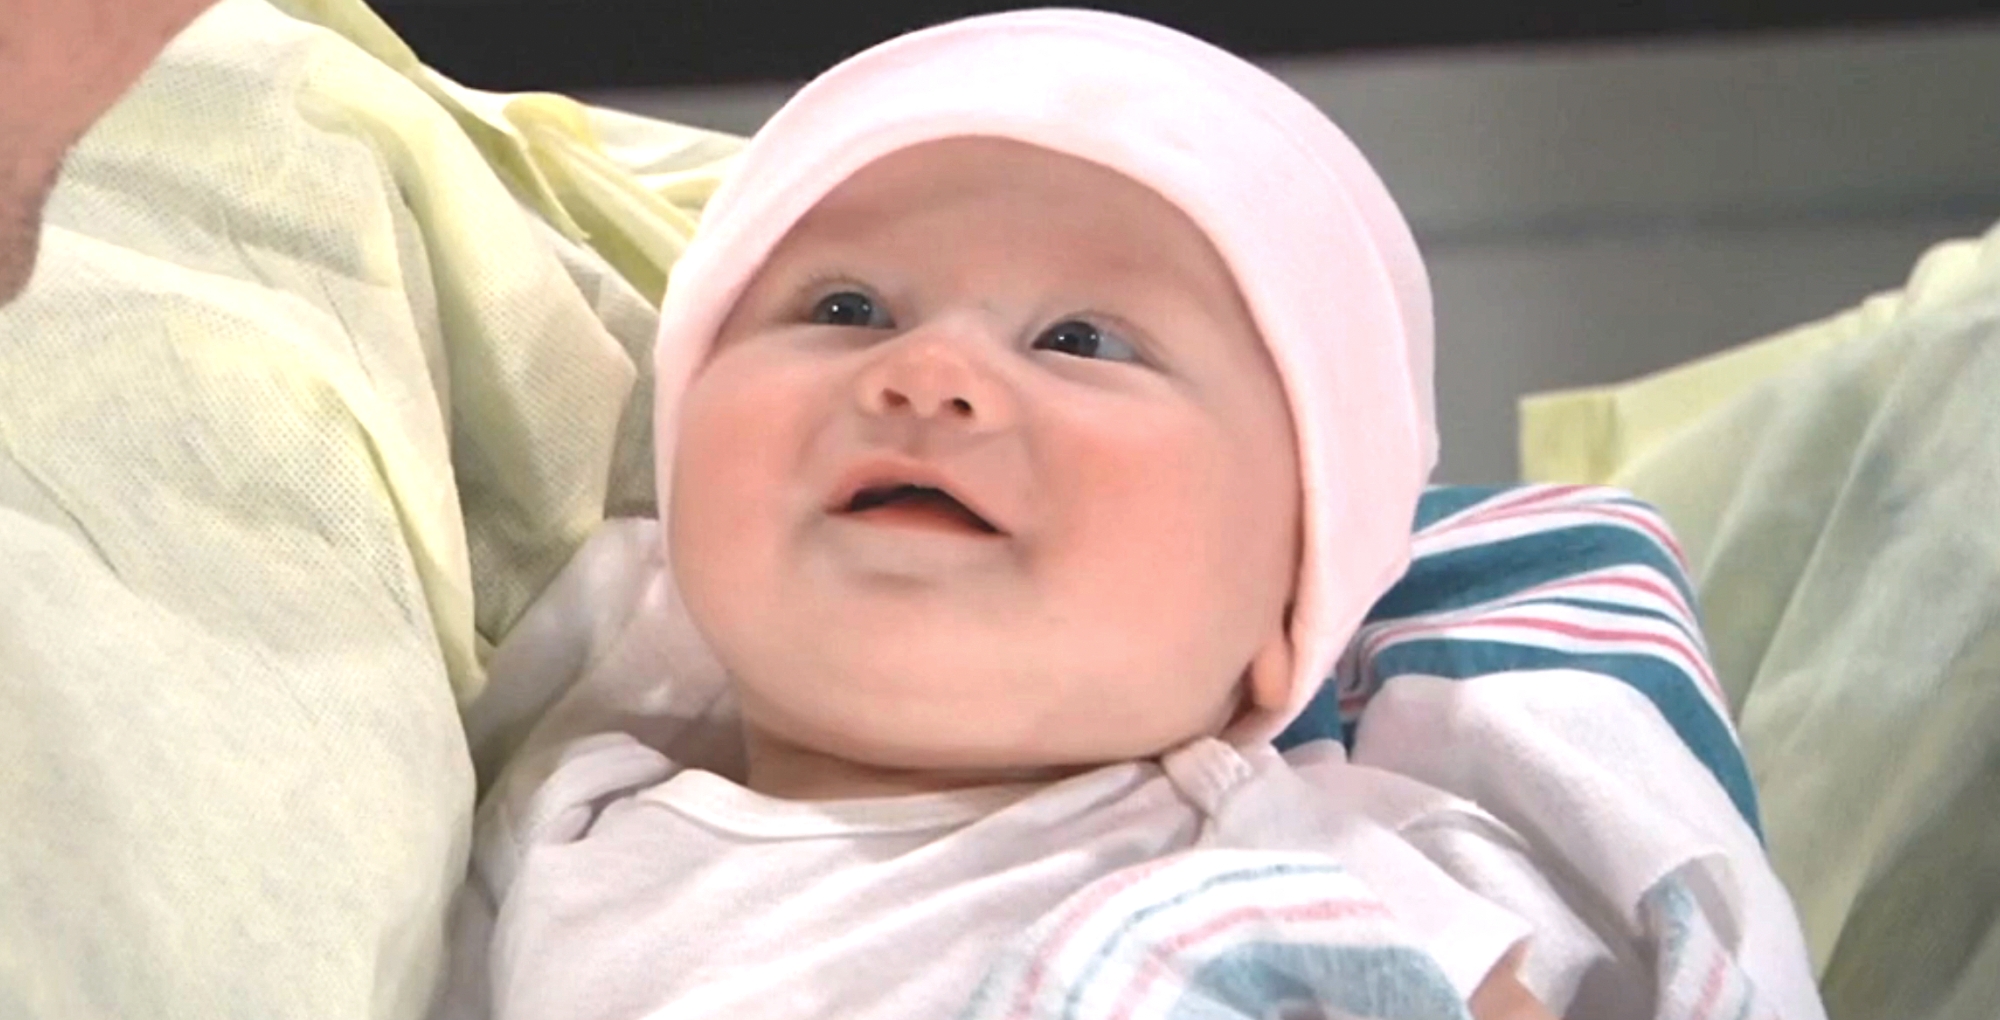 general hospital has a new baby amelia grace smiling with a pink hat